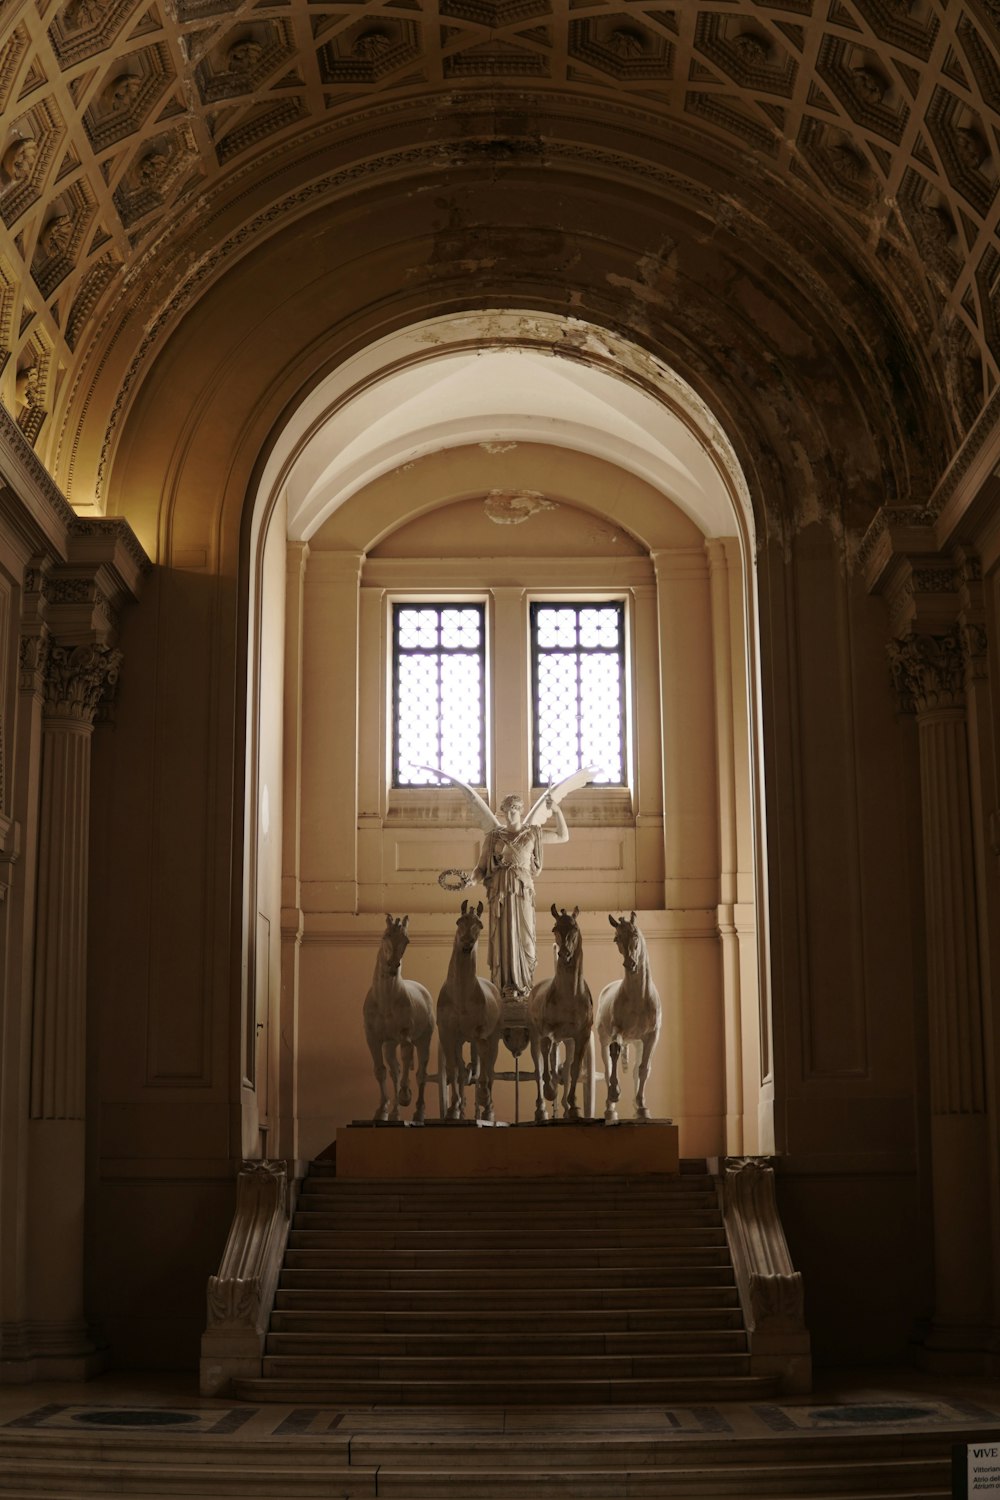 a statue of a person surrounded by animals